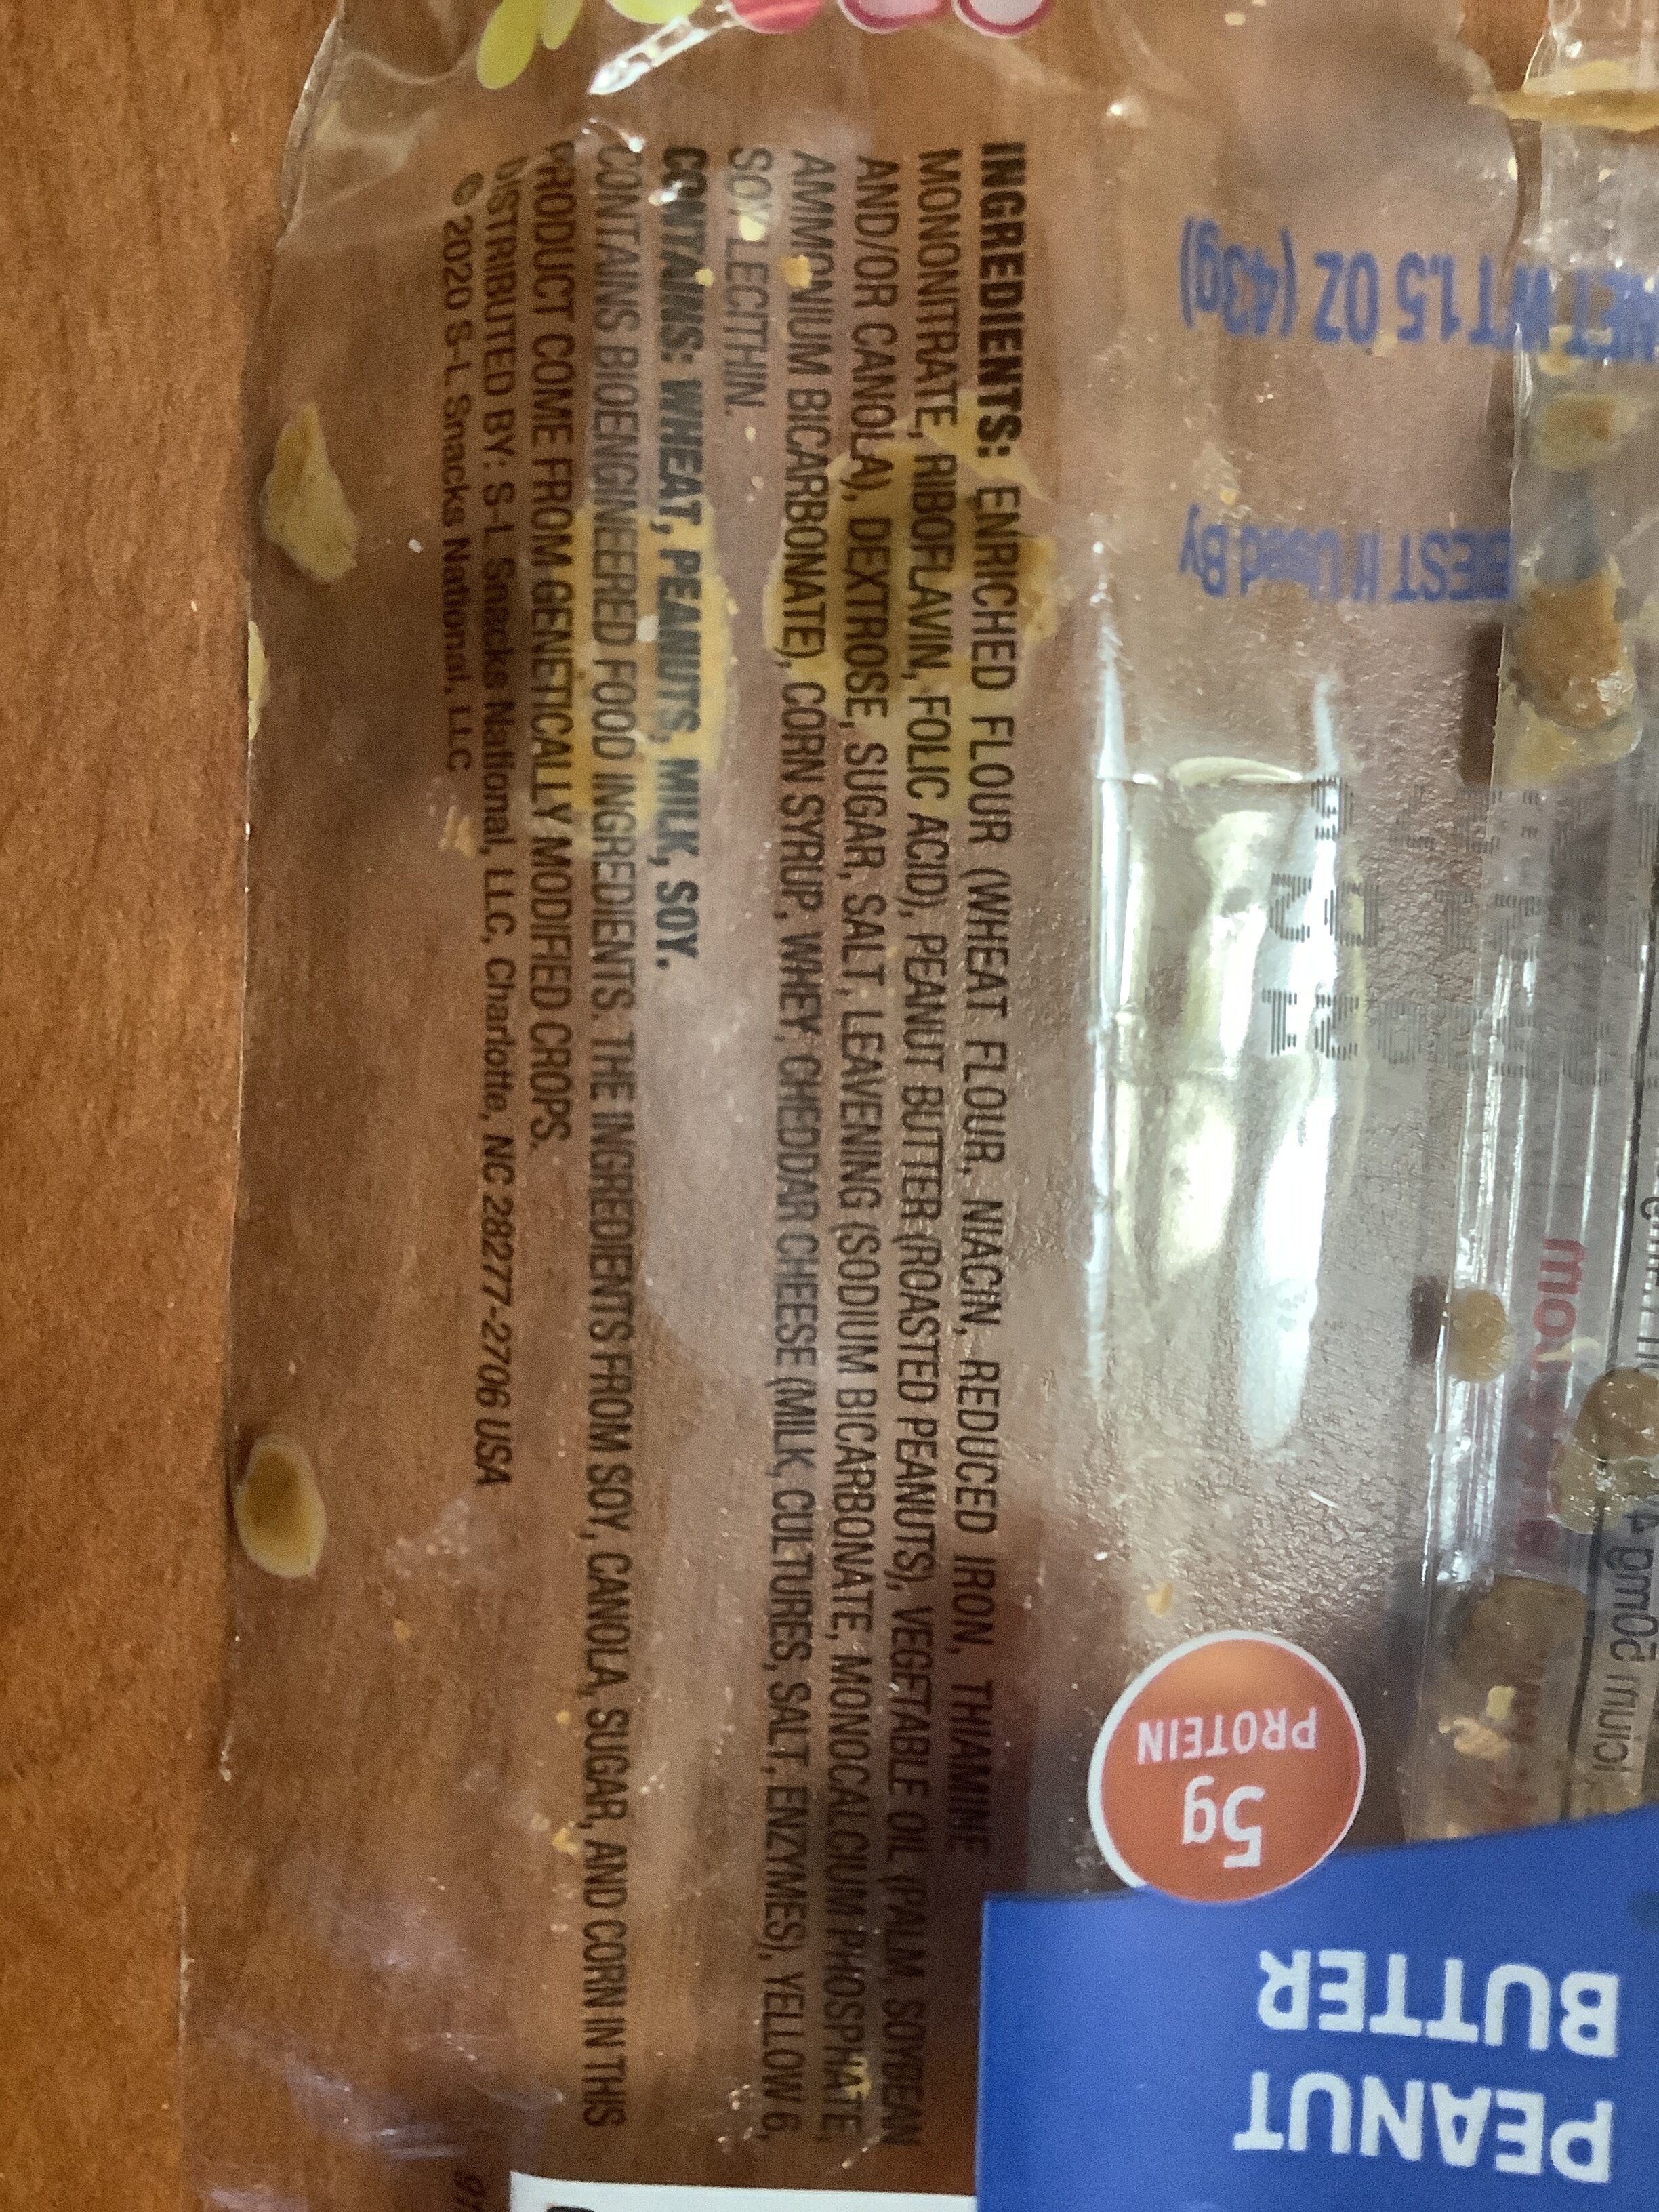 Sandwich crackers, real peanut butter - Ingredients